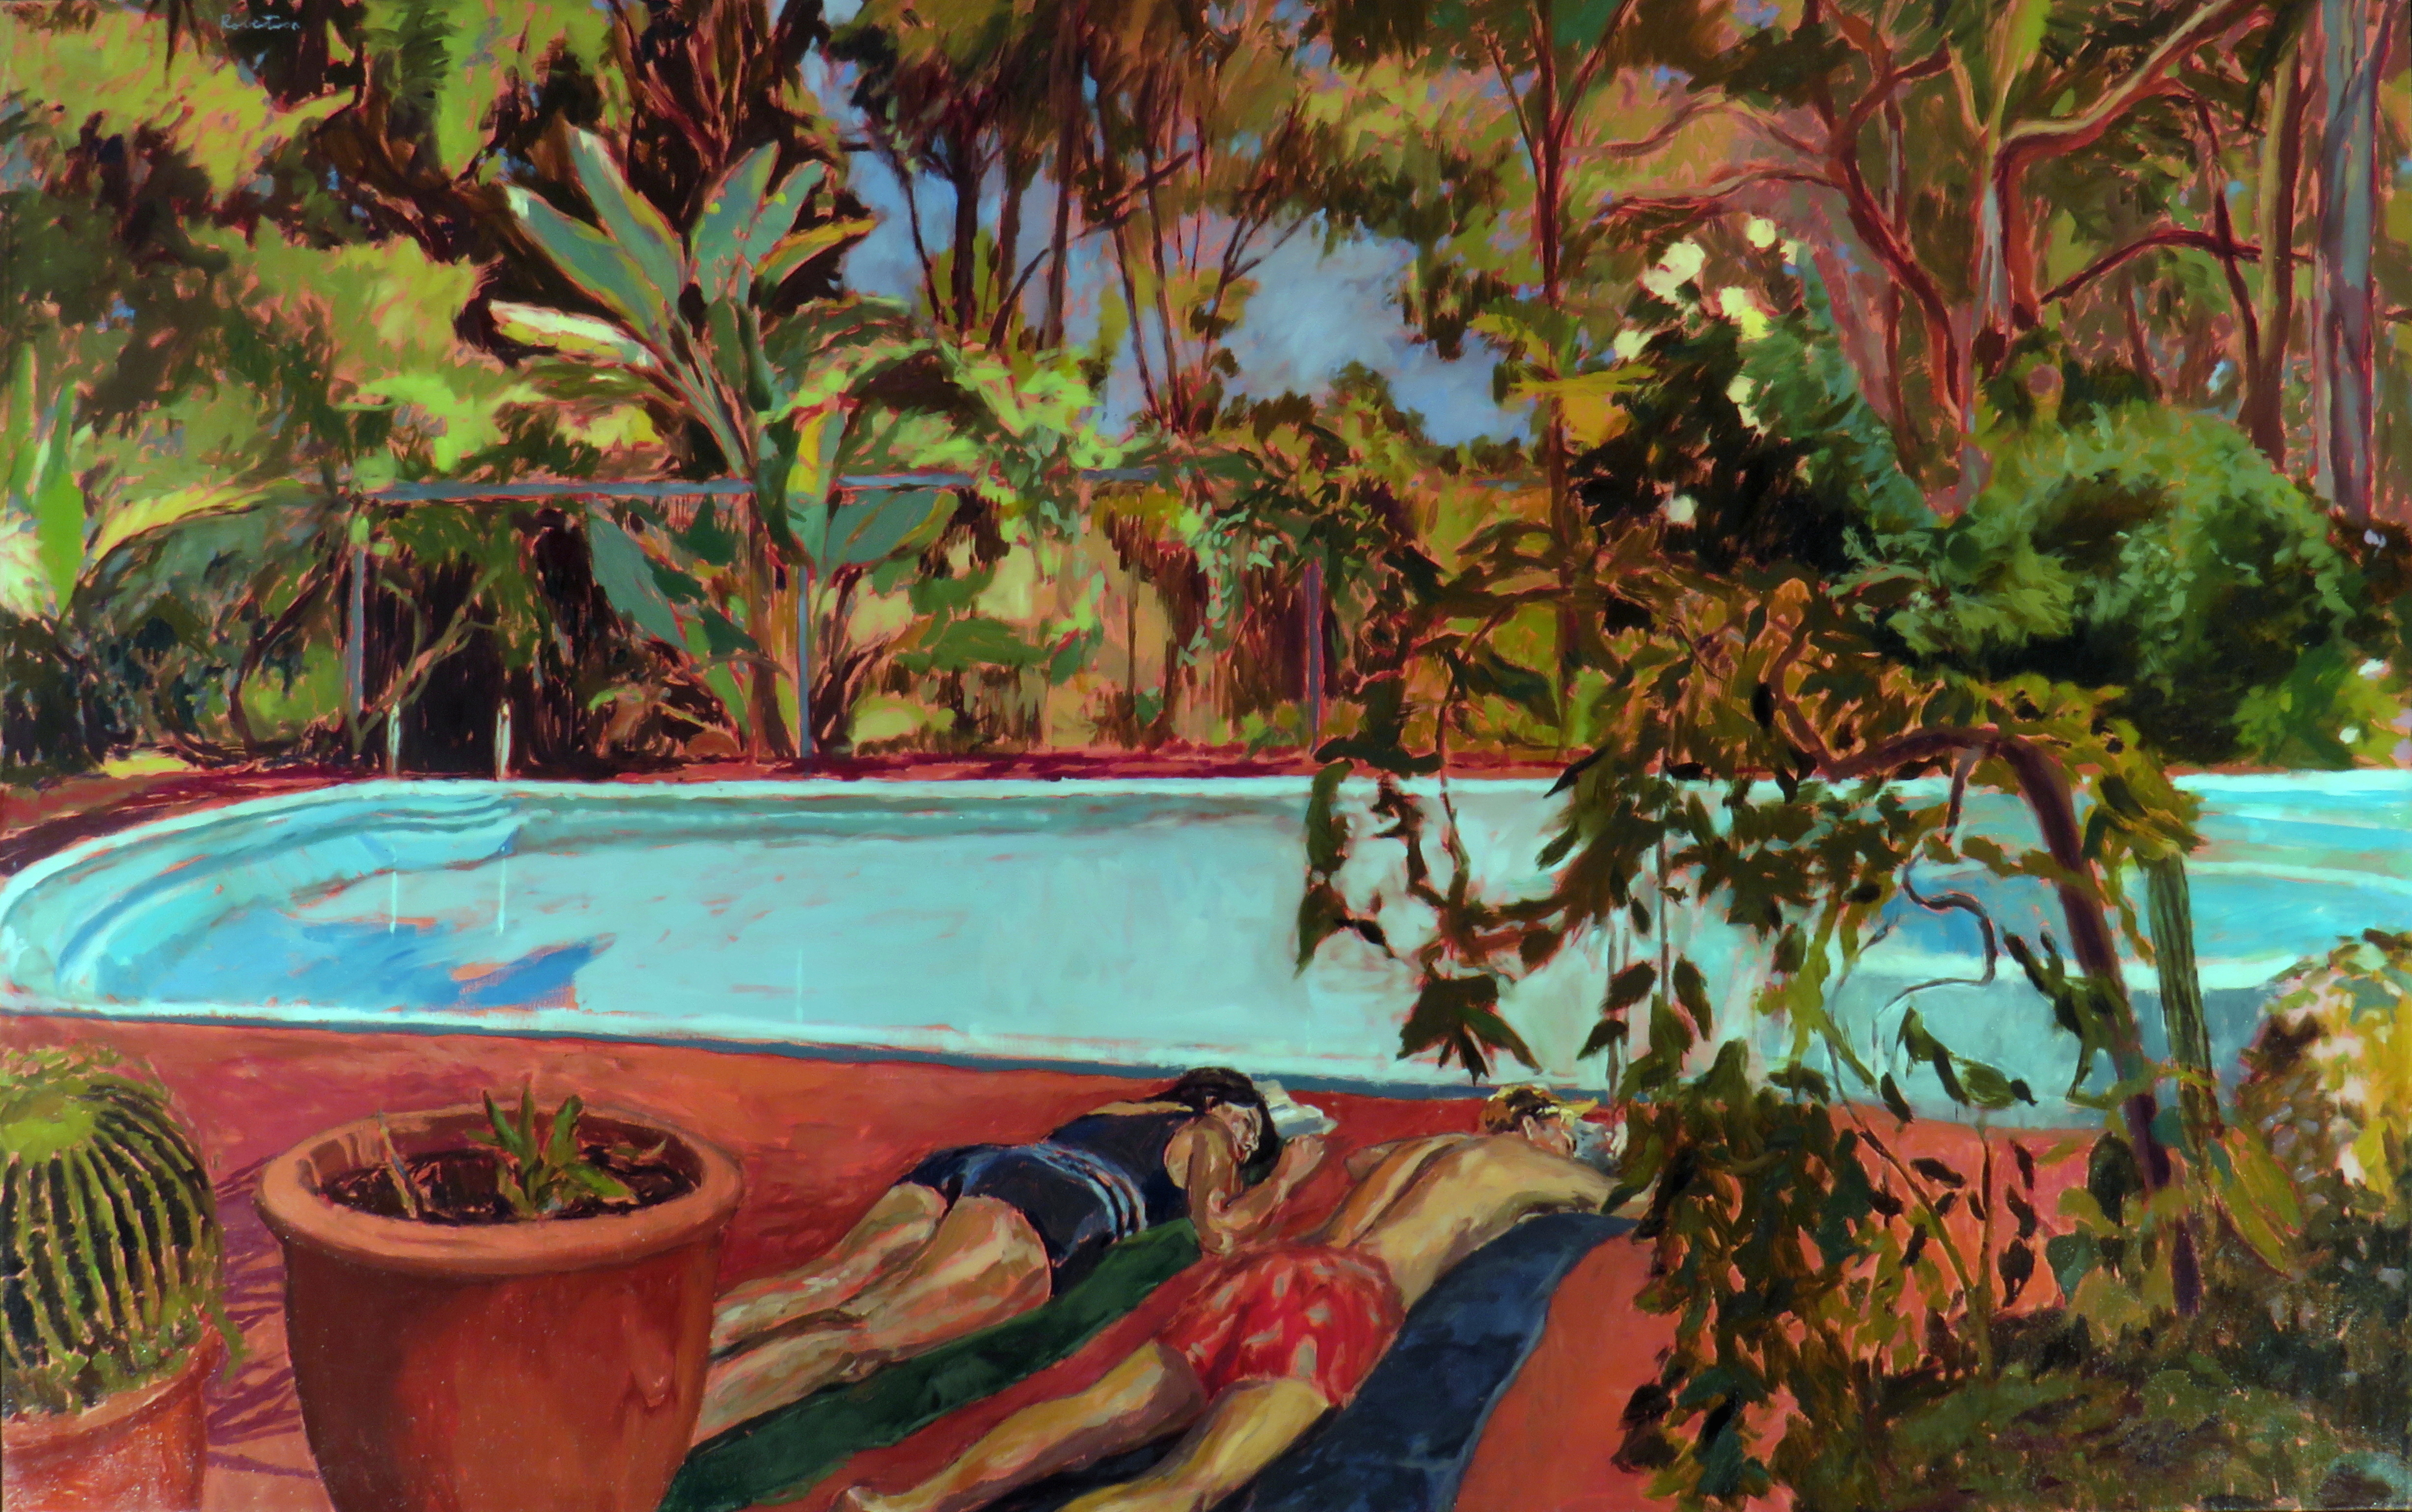 Kevin Robertson, Glen Forrest Pool, 1997, oil on linen, 120 x 195cm. Purchased through the Rachel Mabel Chapman Bequest, Art Gallery of Western Australia Foundation, 2020.